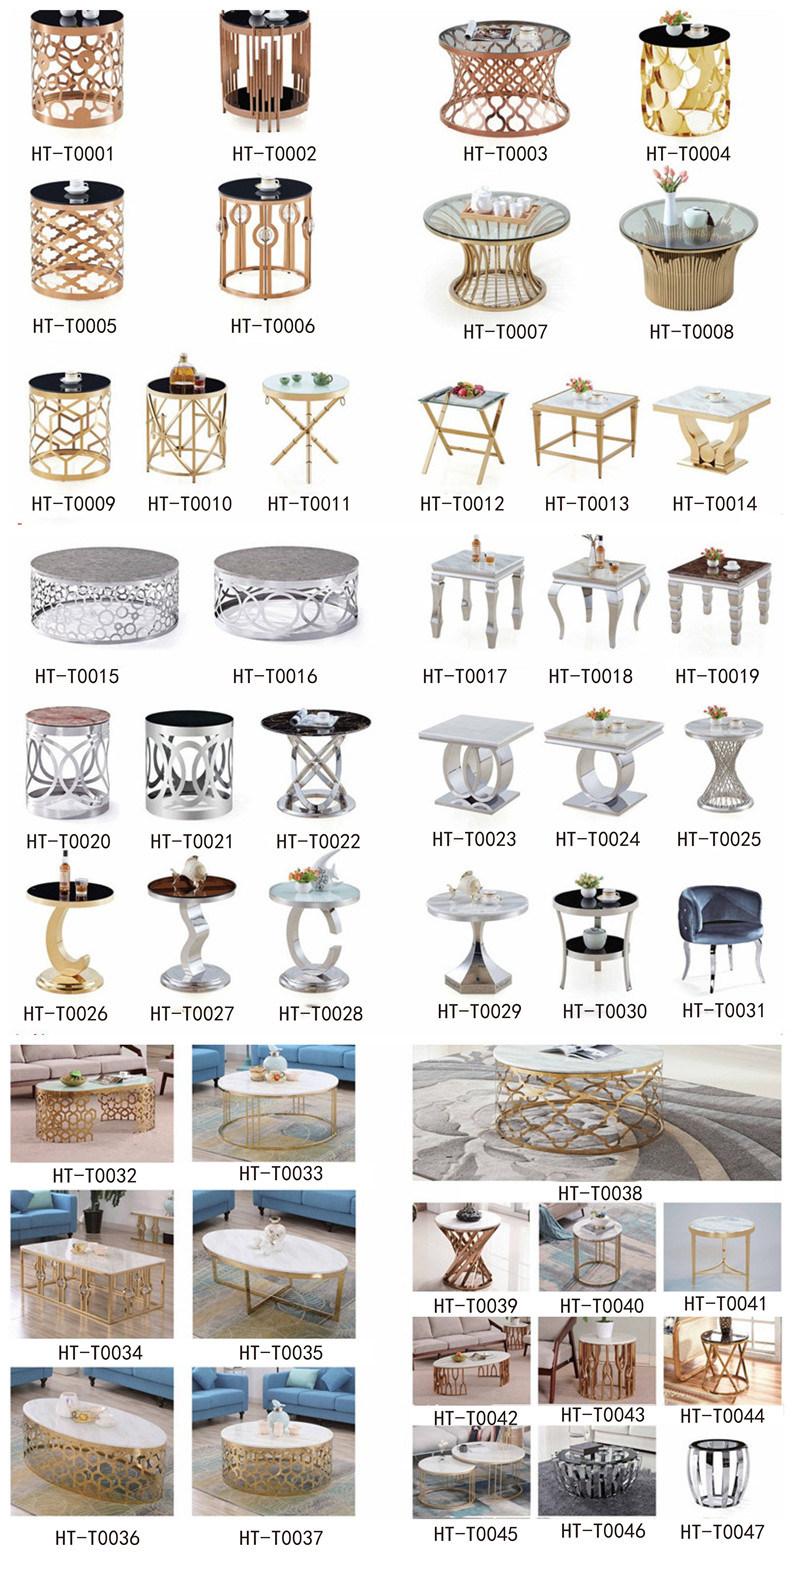 Living Room Furniture Marble Top Dining Table Hotel Furniture Set Modern Rectangle Table